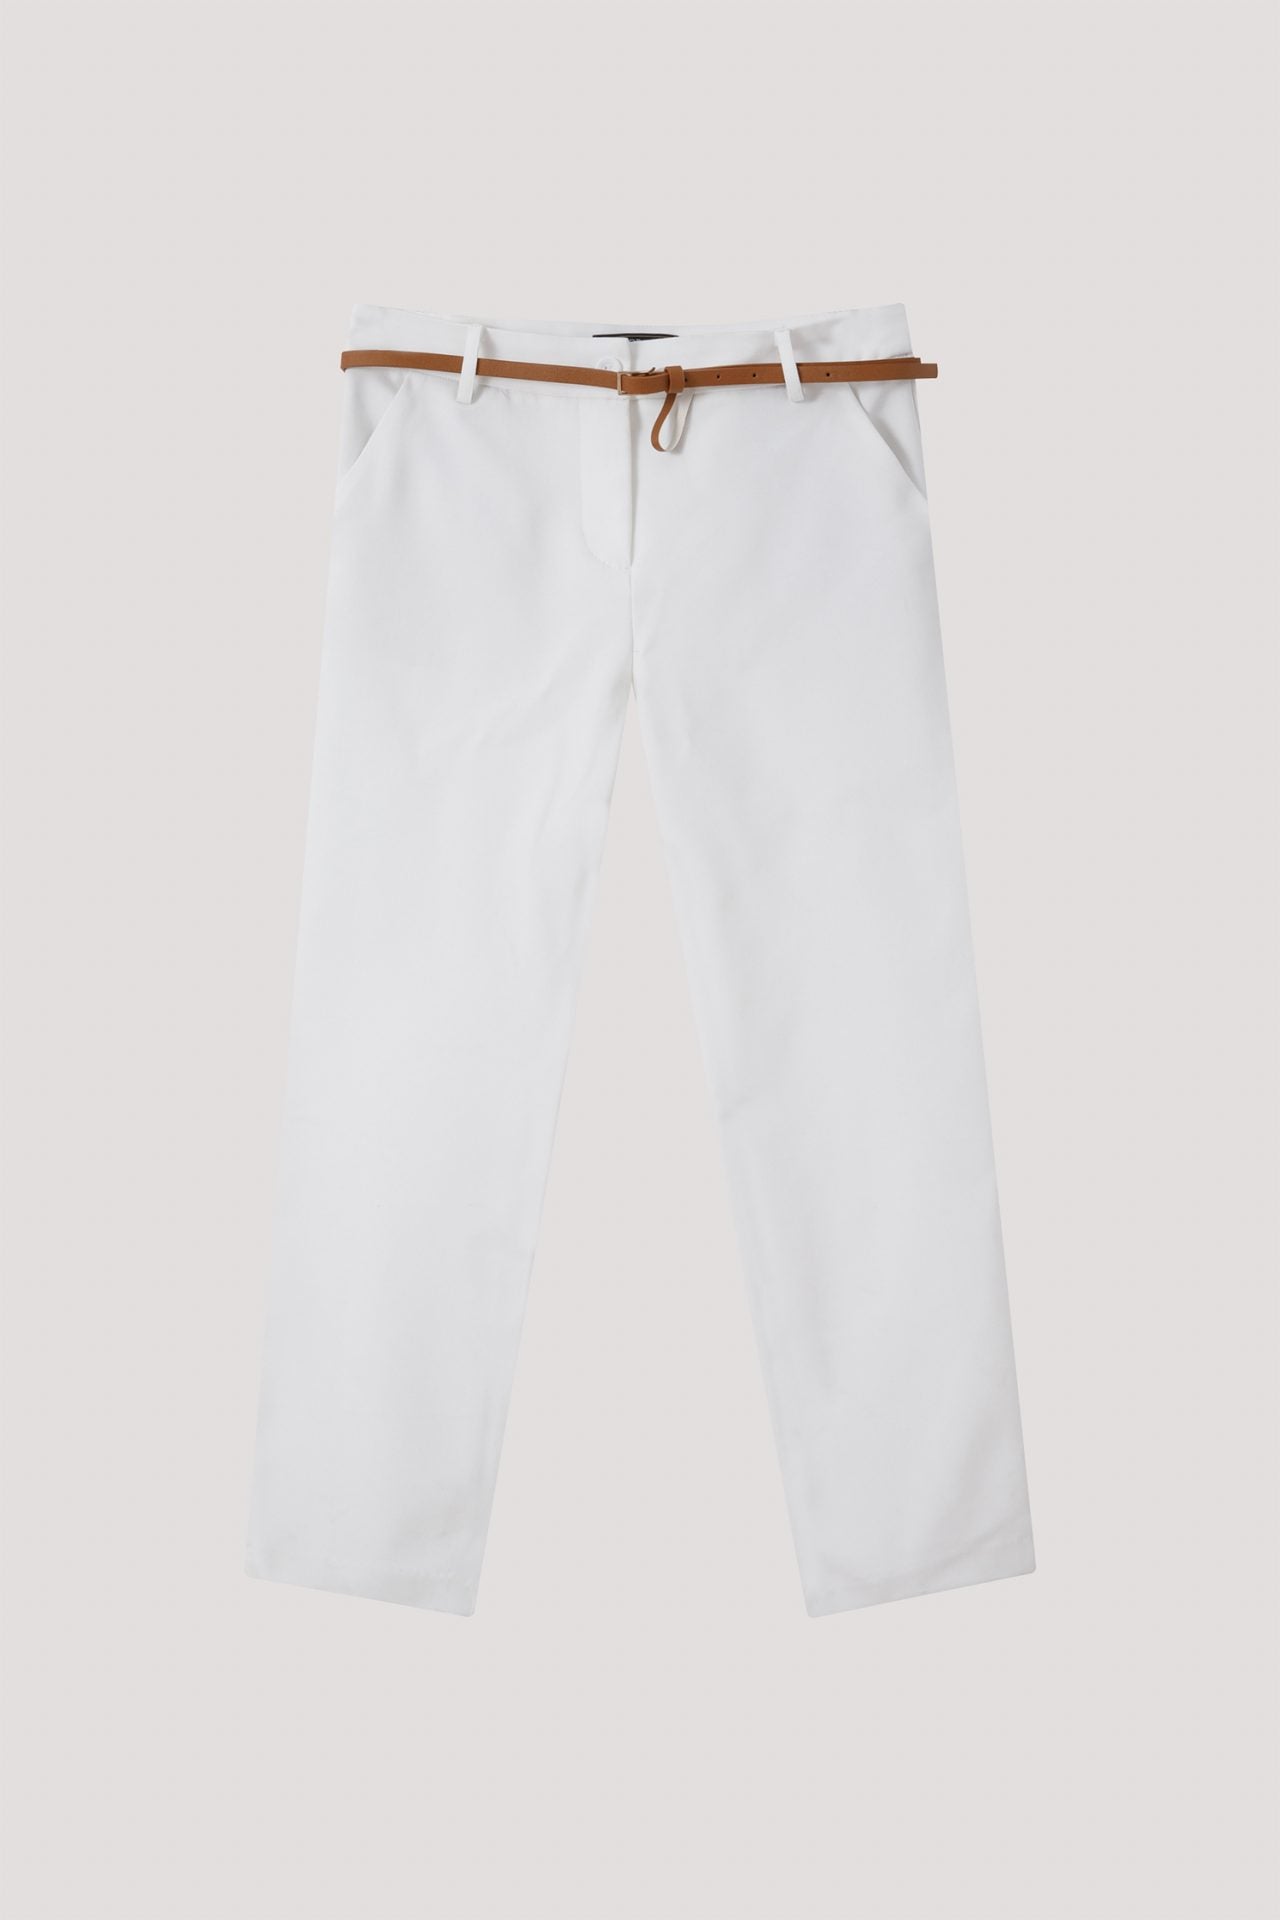 apl 7620 belted straight long pants cream